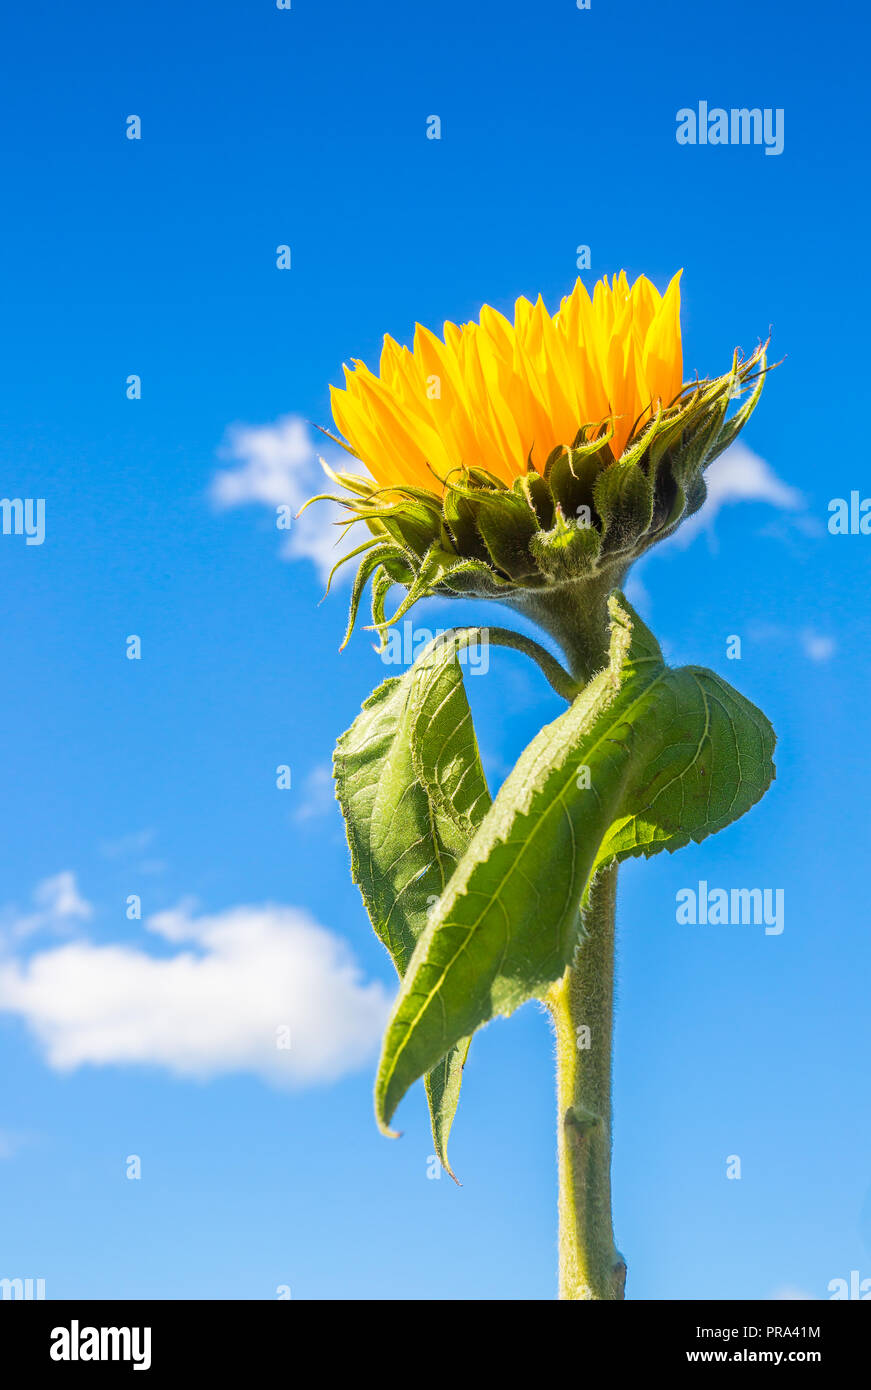 Detailed portrait close up of single, upright sunflower stem (bright yellow head & green leaves) against deep blue sky & fluffy clouds in background. Stock Photo